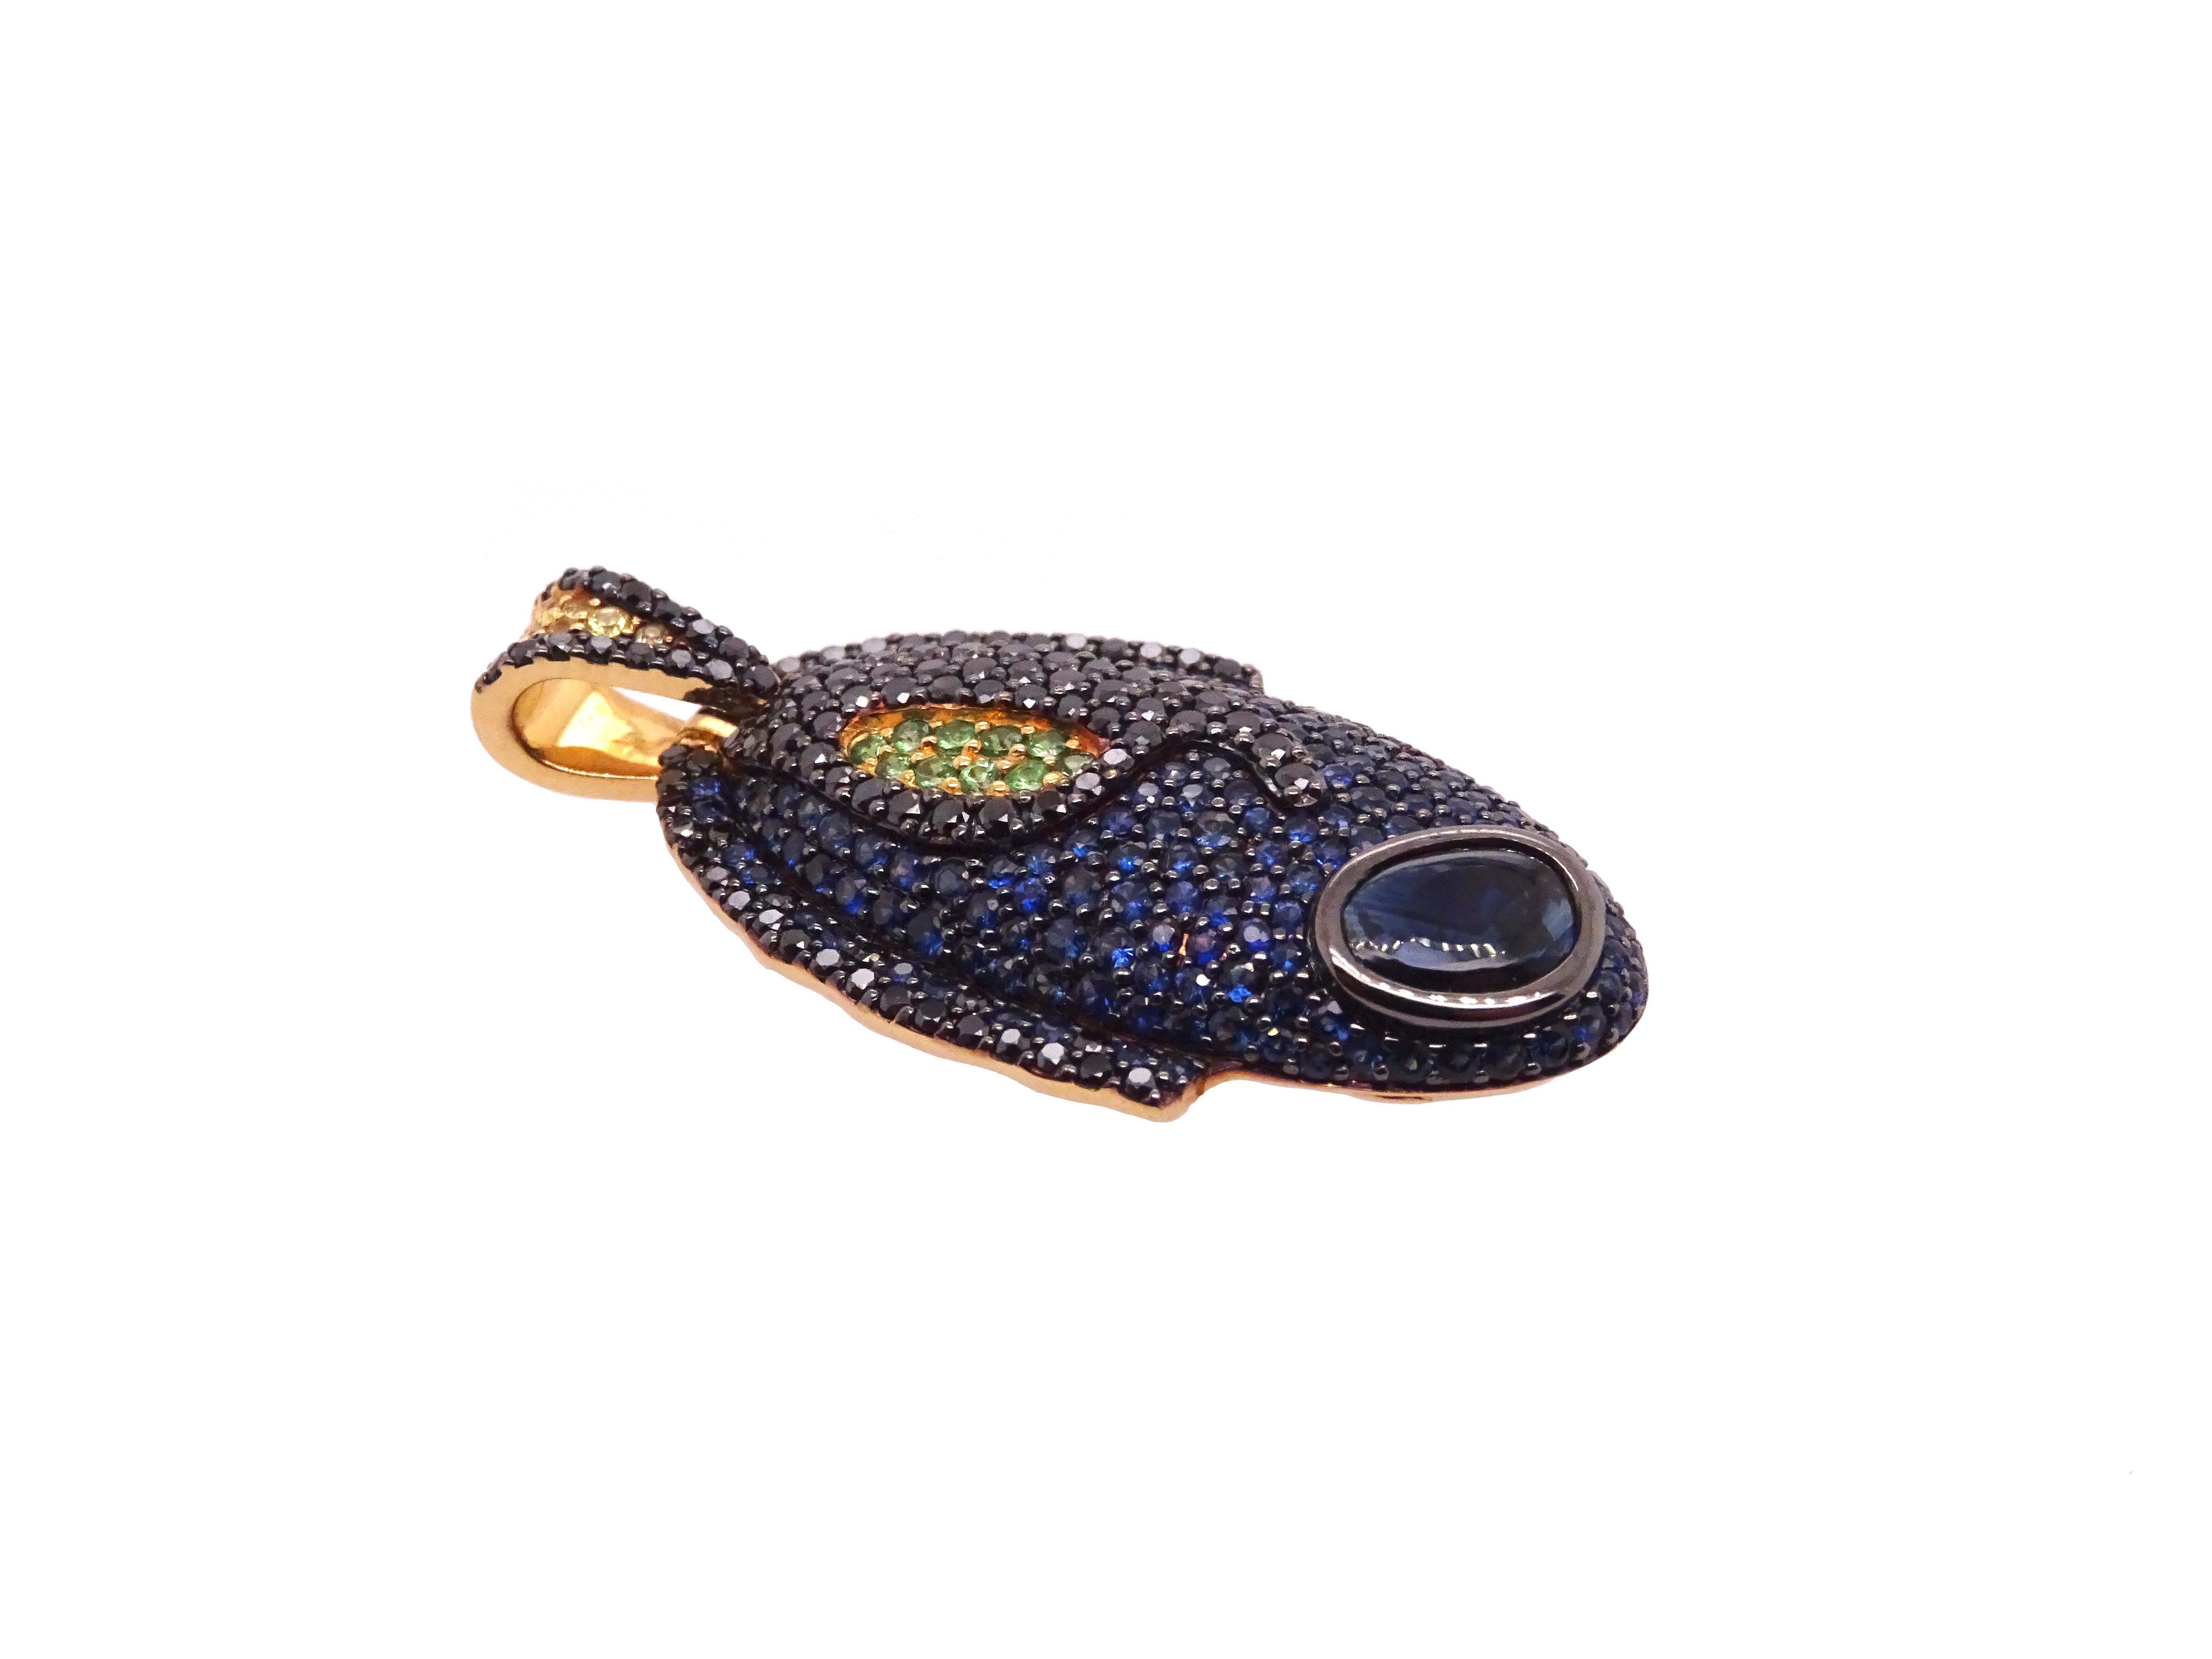 Ocean Dreams collection by VOTIVE.

Immerse yourself in the captivating allure of VOTIVE's Ocean Dreams collection, featuring a striking 18K yellow gold pendant adorned with black diamonds, yellow and blue sapphires, and tsavorites. Inspired by the